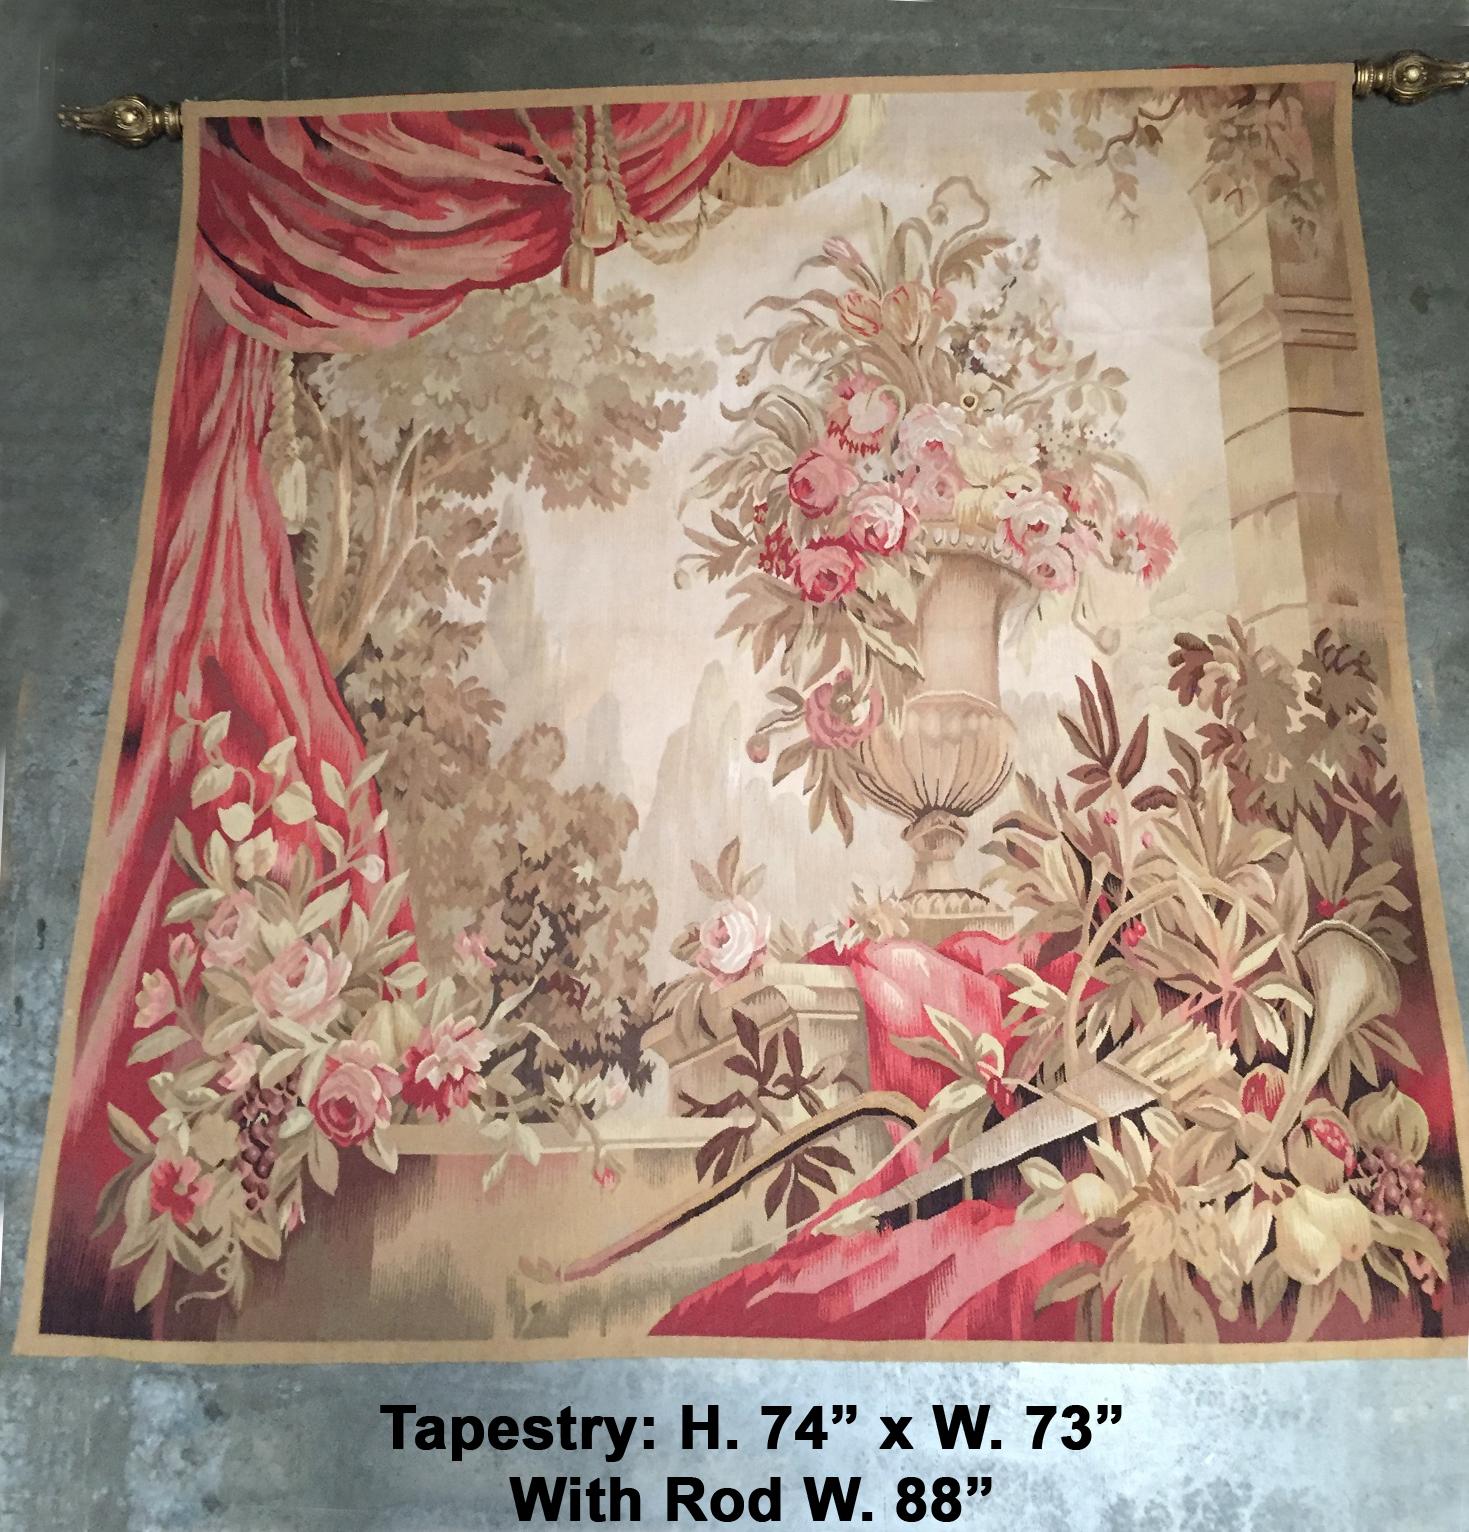 Fabulous French Louis XVI style handmade very detailed tapestry depicting a still life scene of a floral garden with red drapery and Campana-shaped urn containing beautiful floral bouquets. Mid-20th century.
The colors are imposing. 

Overall